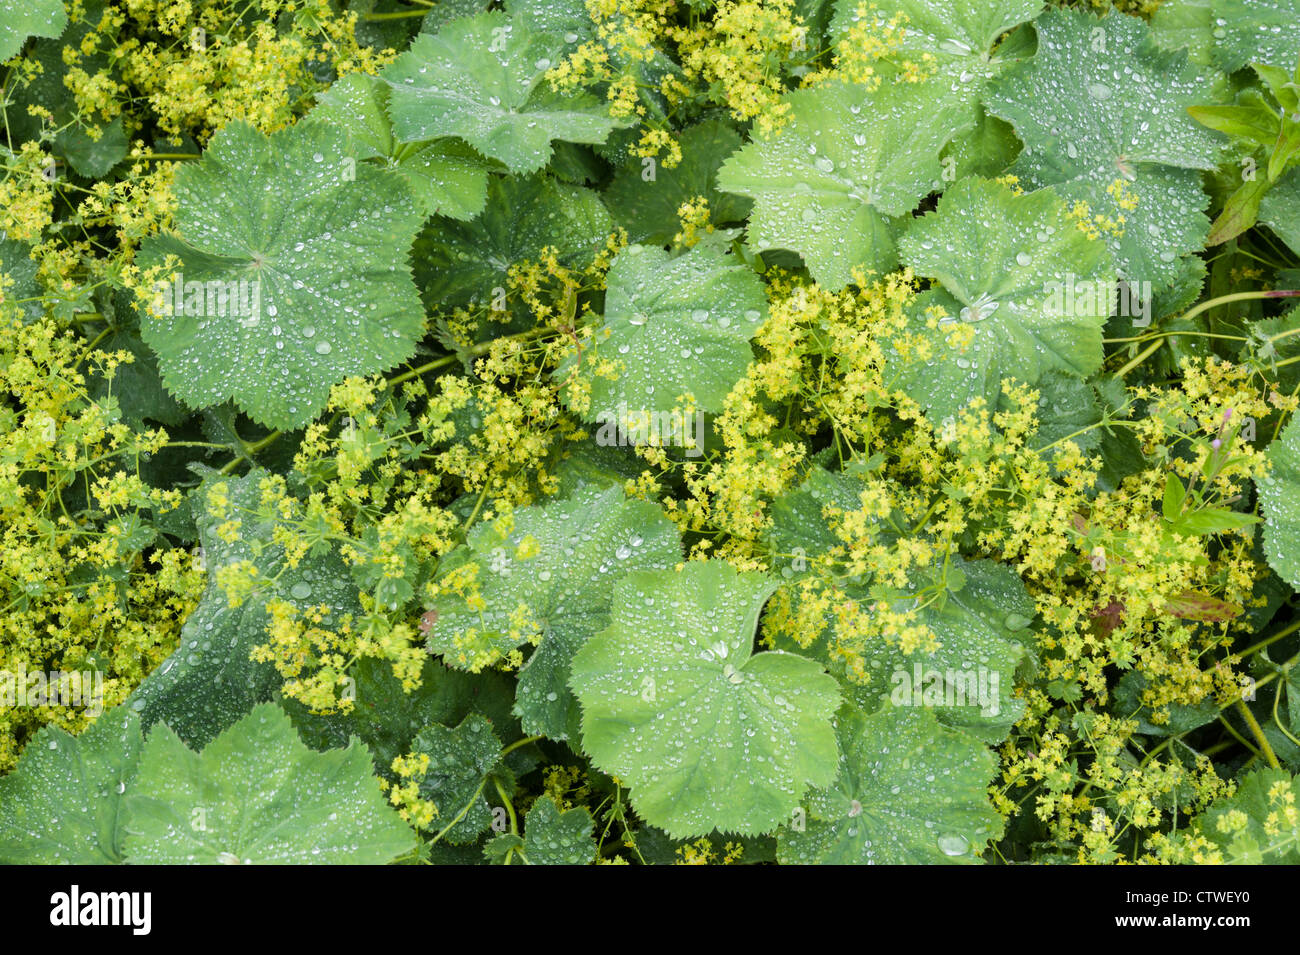 Lady's Mantle Alchemilla herbaceous perennial plants part of the Rosaceae family Stock Photo